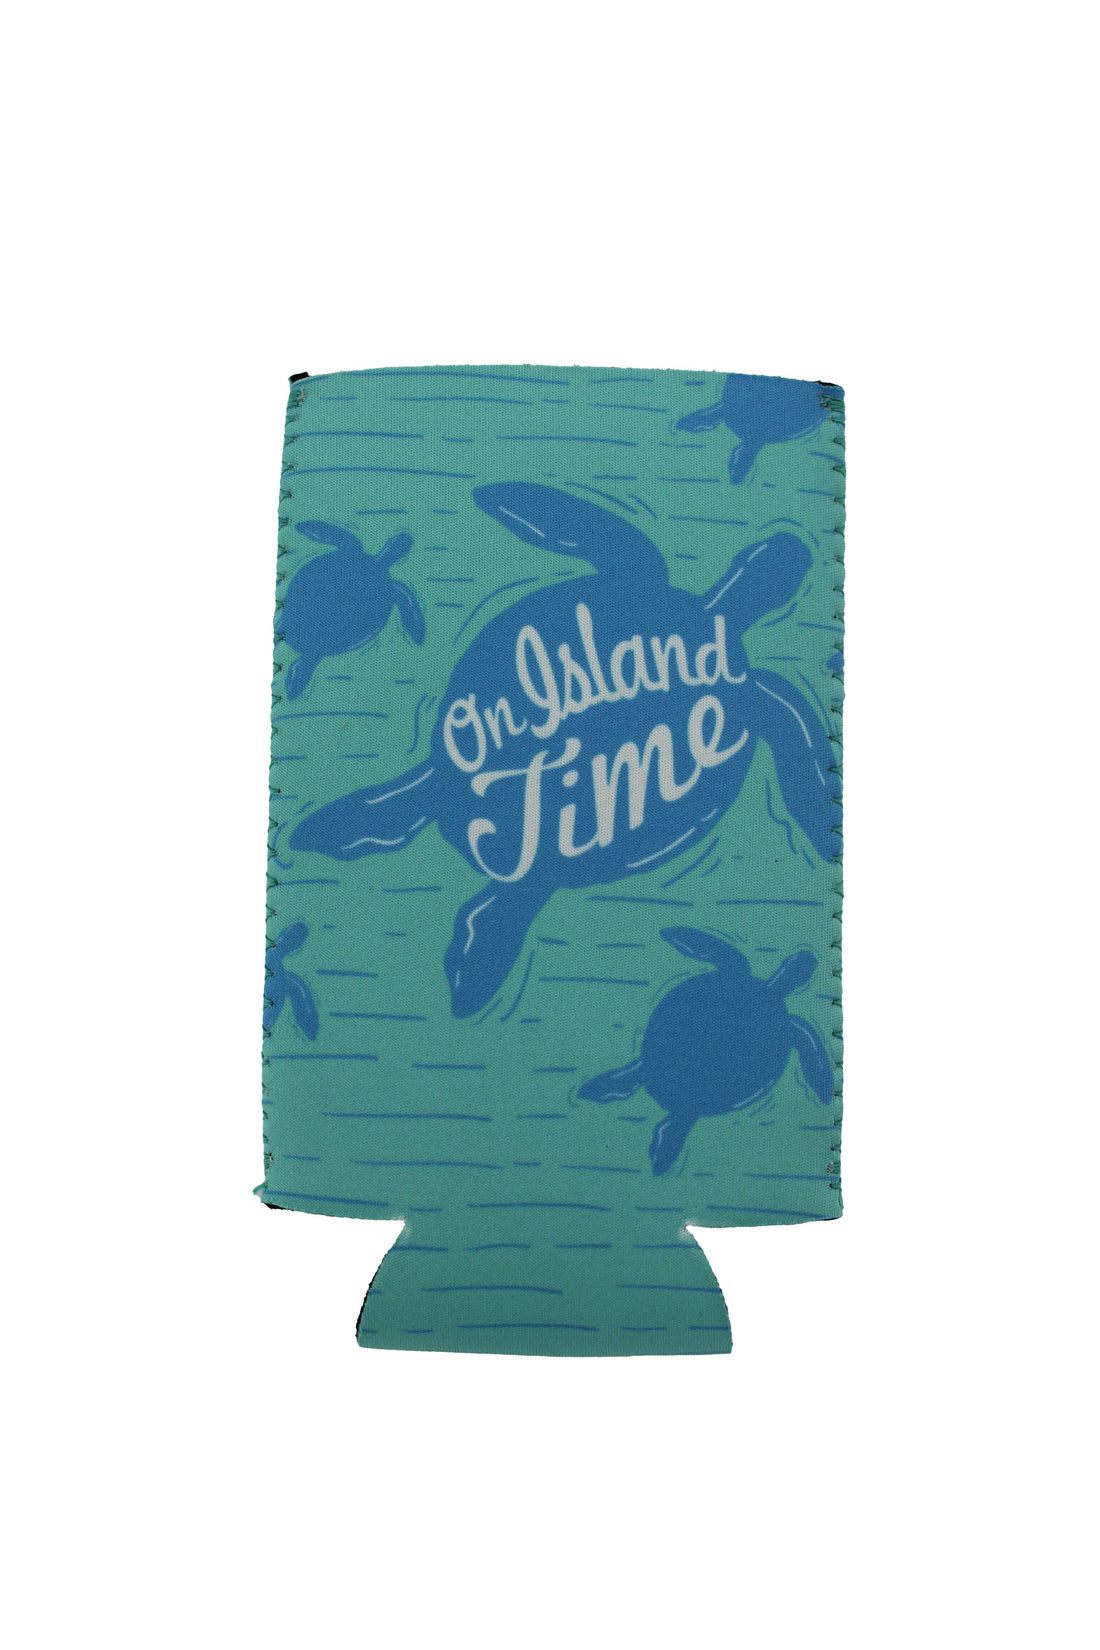 Outer Banks Island Time Turtle Koozie